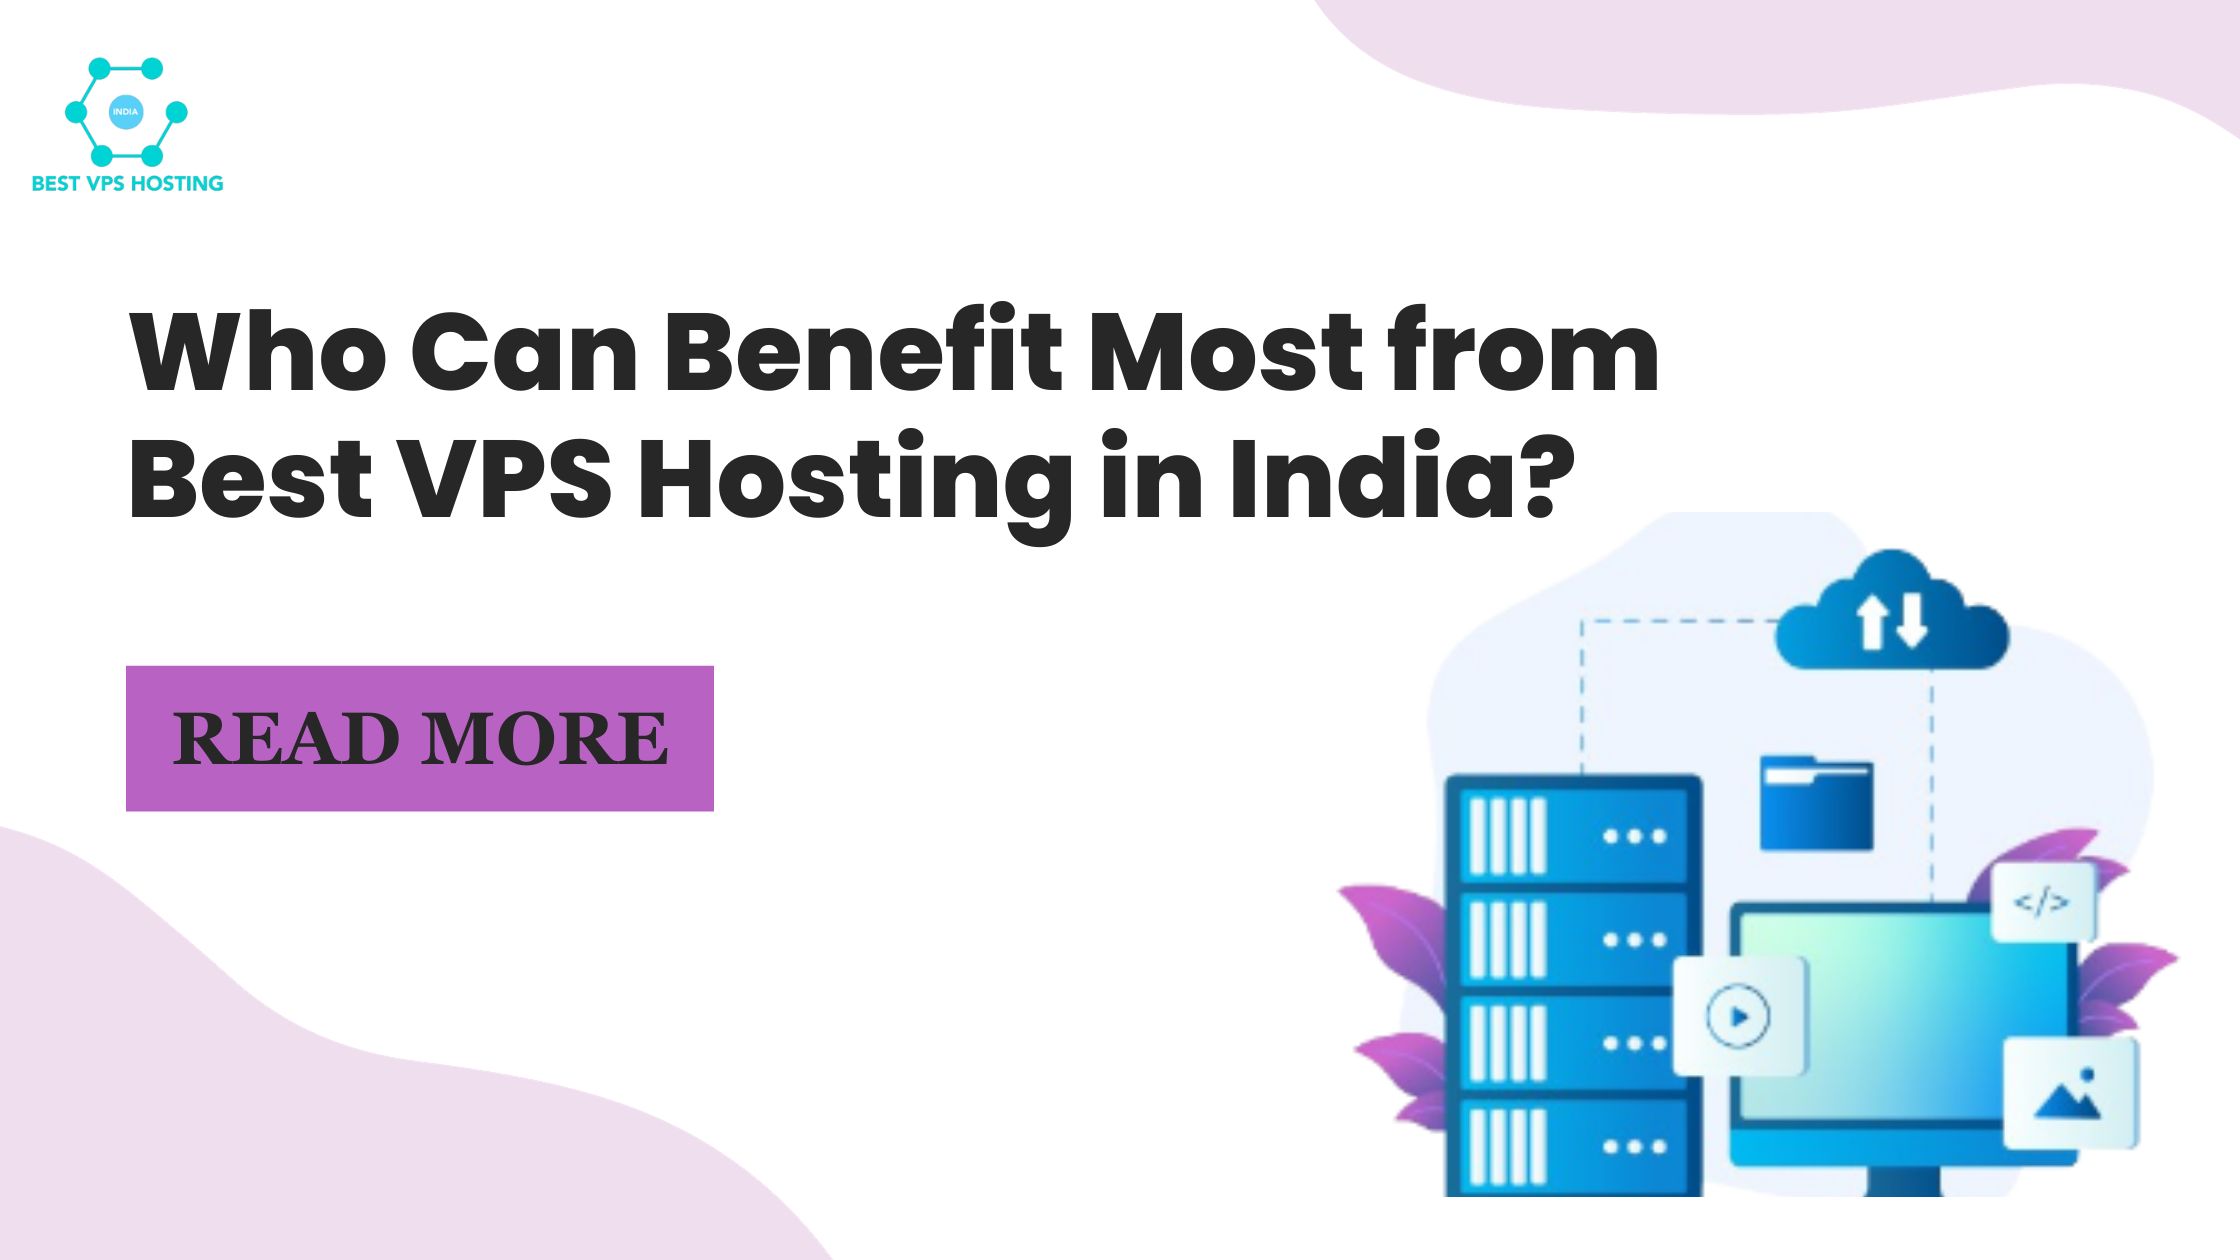 Who Can Benefit Most from Best VPS Hosting in India?